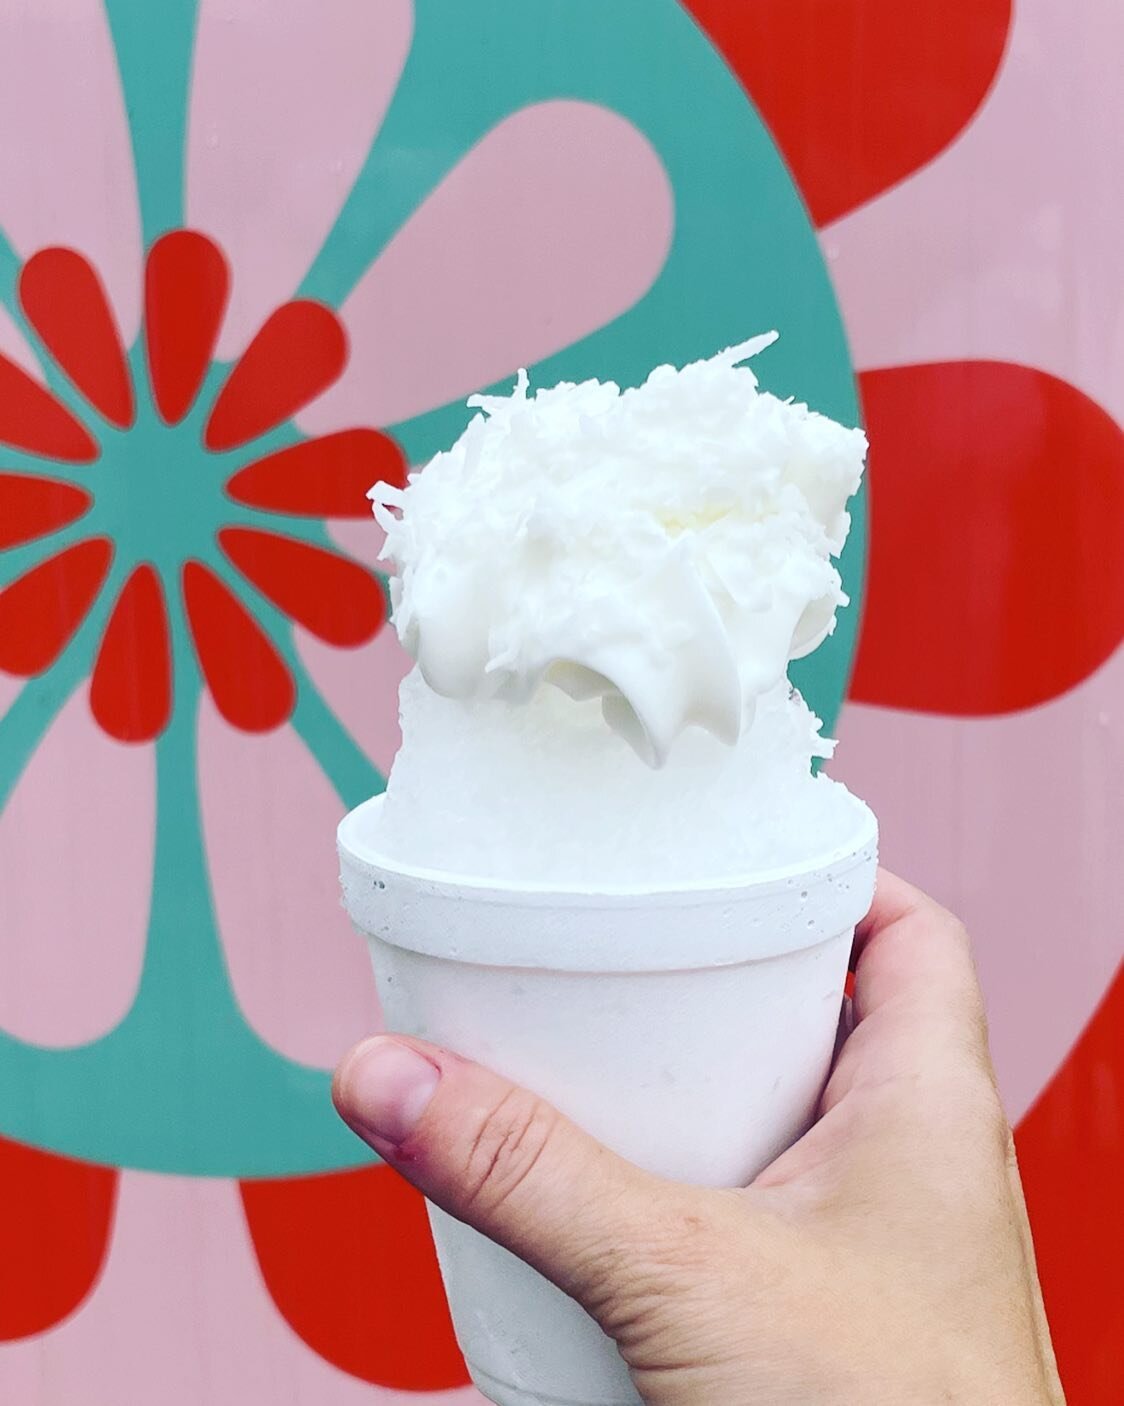 🤍THE WHITE LINEN 🤍
*Your choice of pina colada, coconut, or wedding cake topped with whipped cream and coconut shavings!*

📍Come see us today from 11-1 @frankie_and_flora and 5-9 for white linen night @steeldoorrealty